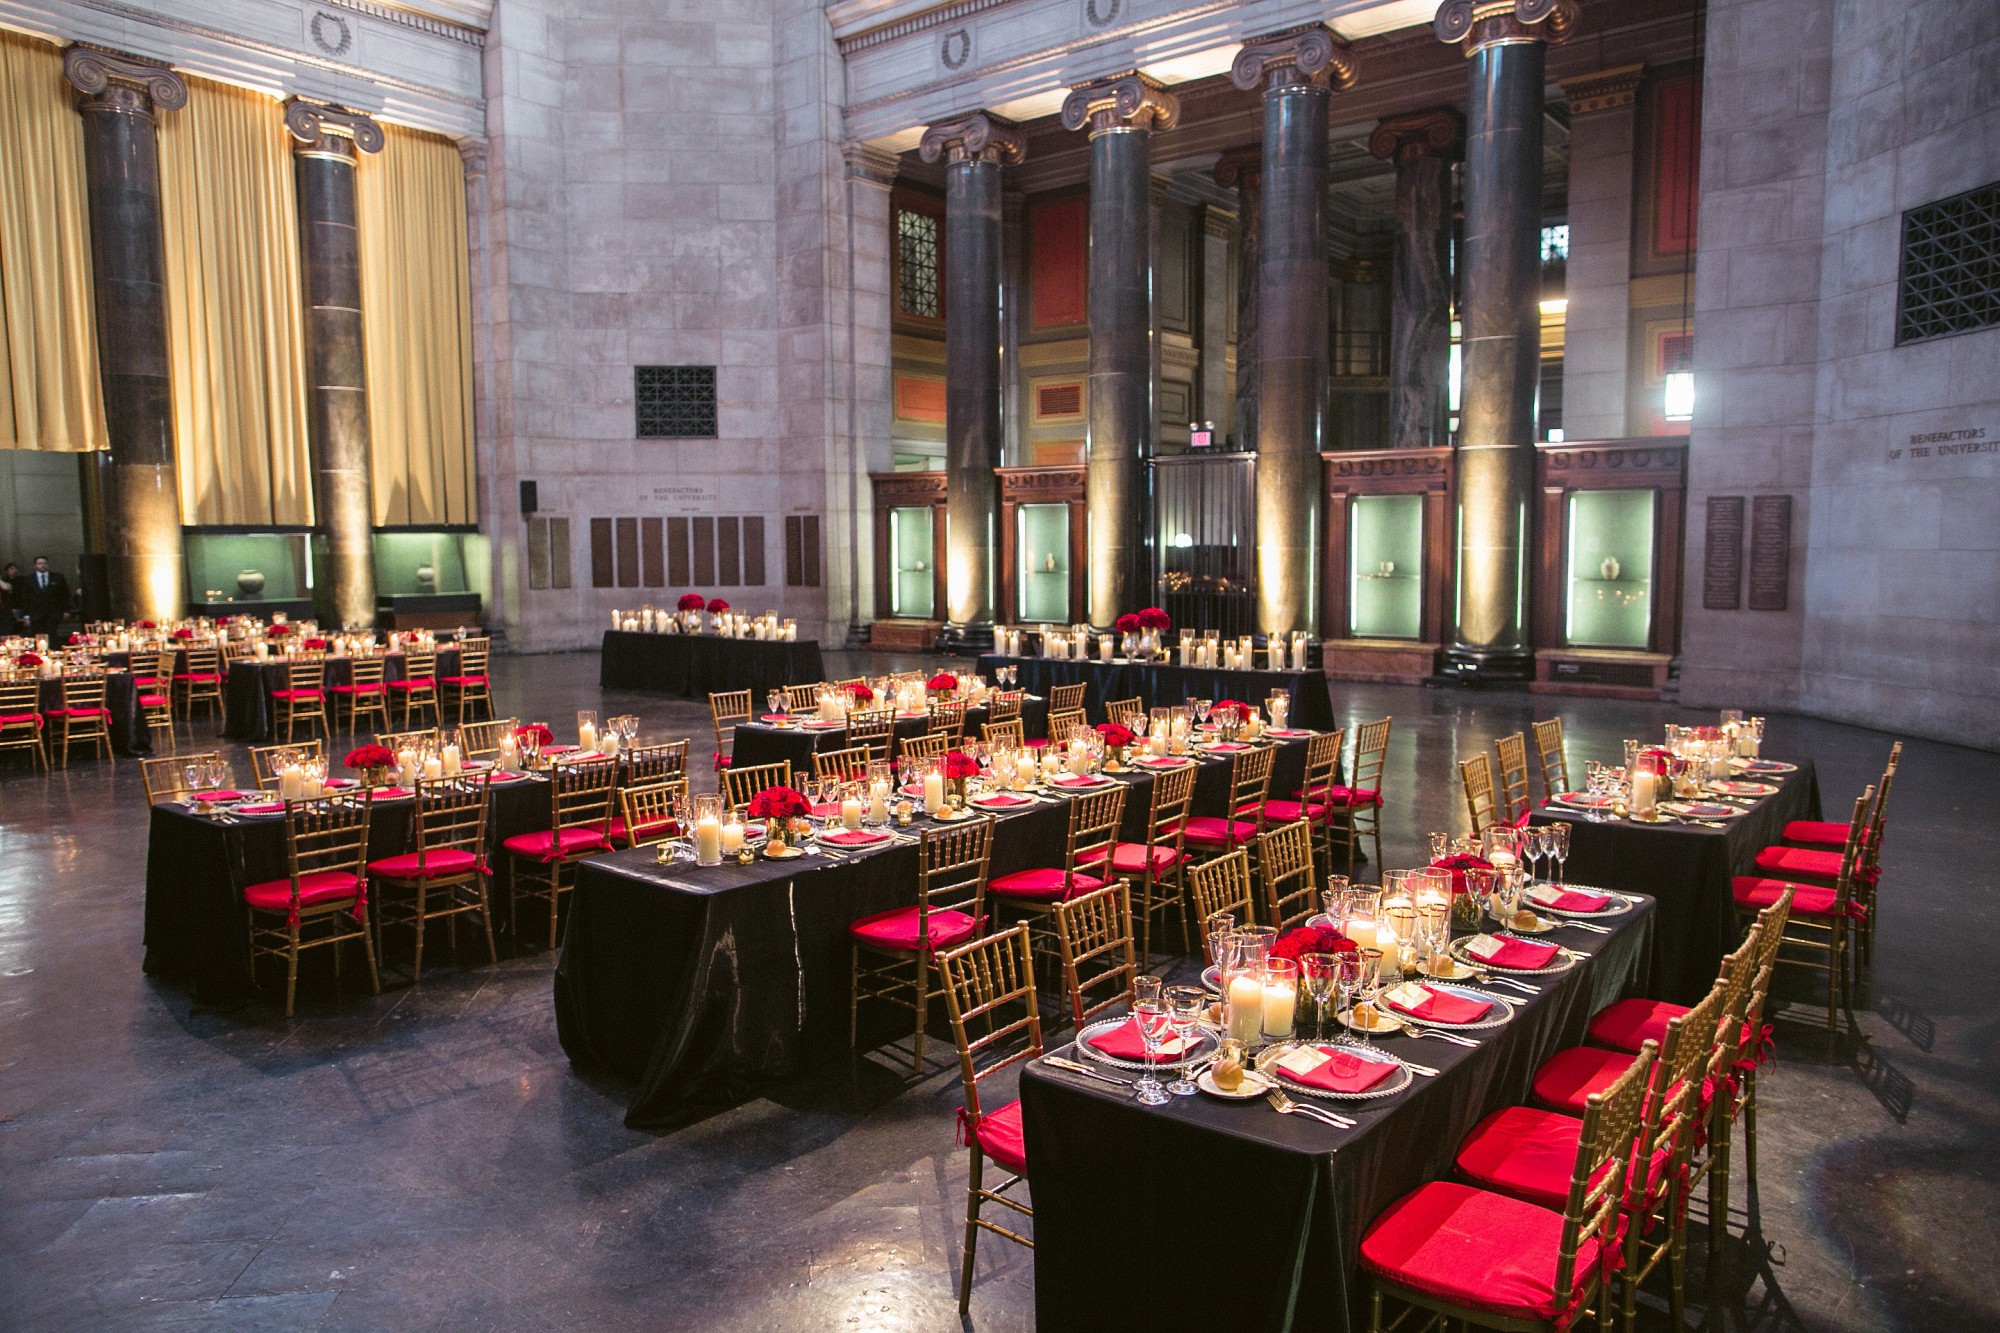 Rectangular tables dressed with black linens sit in a grand rotunda space. 